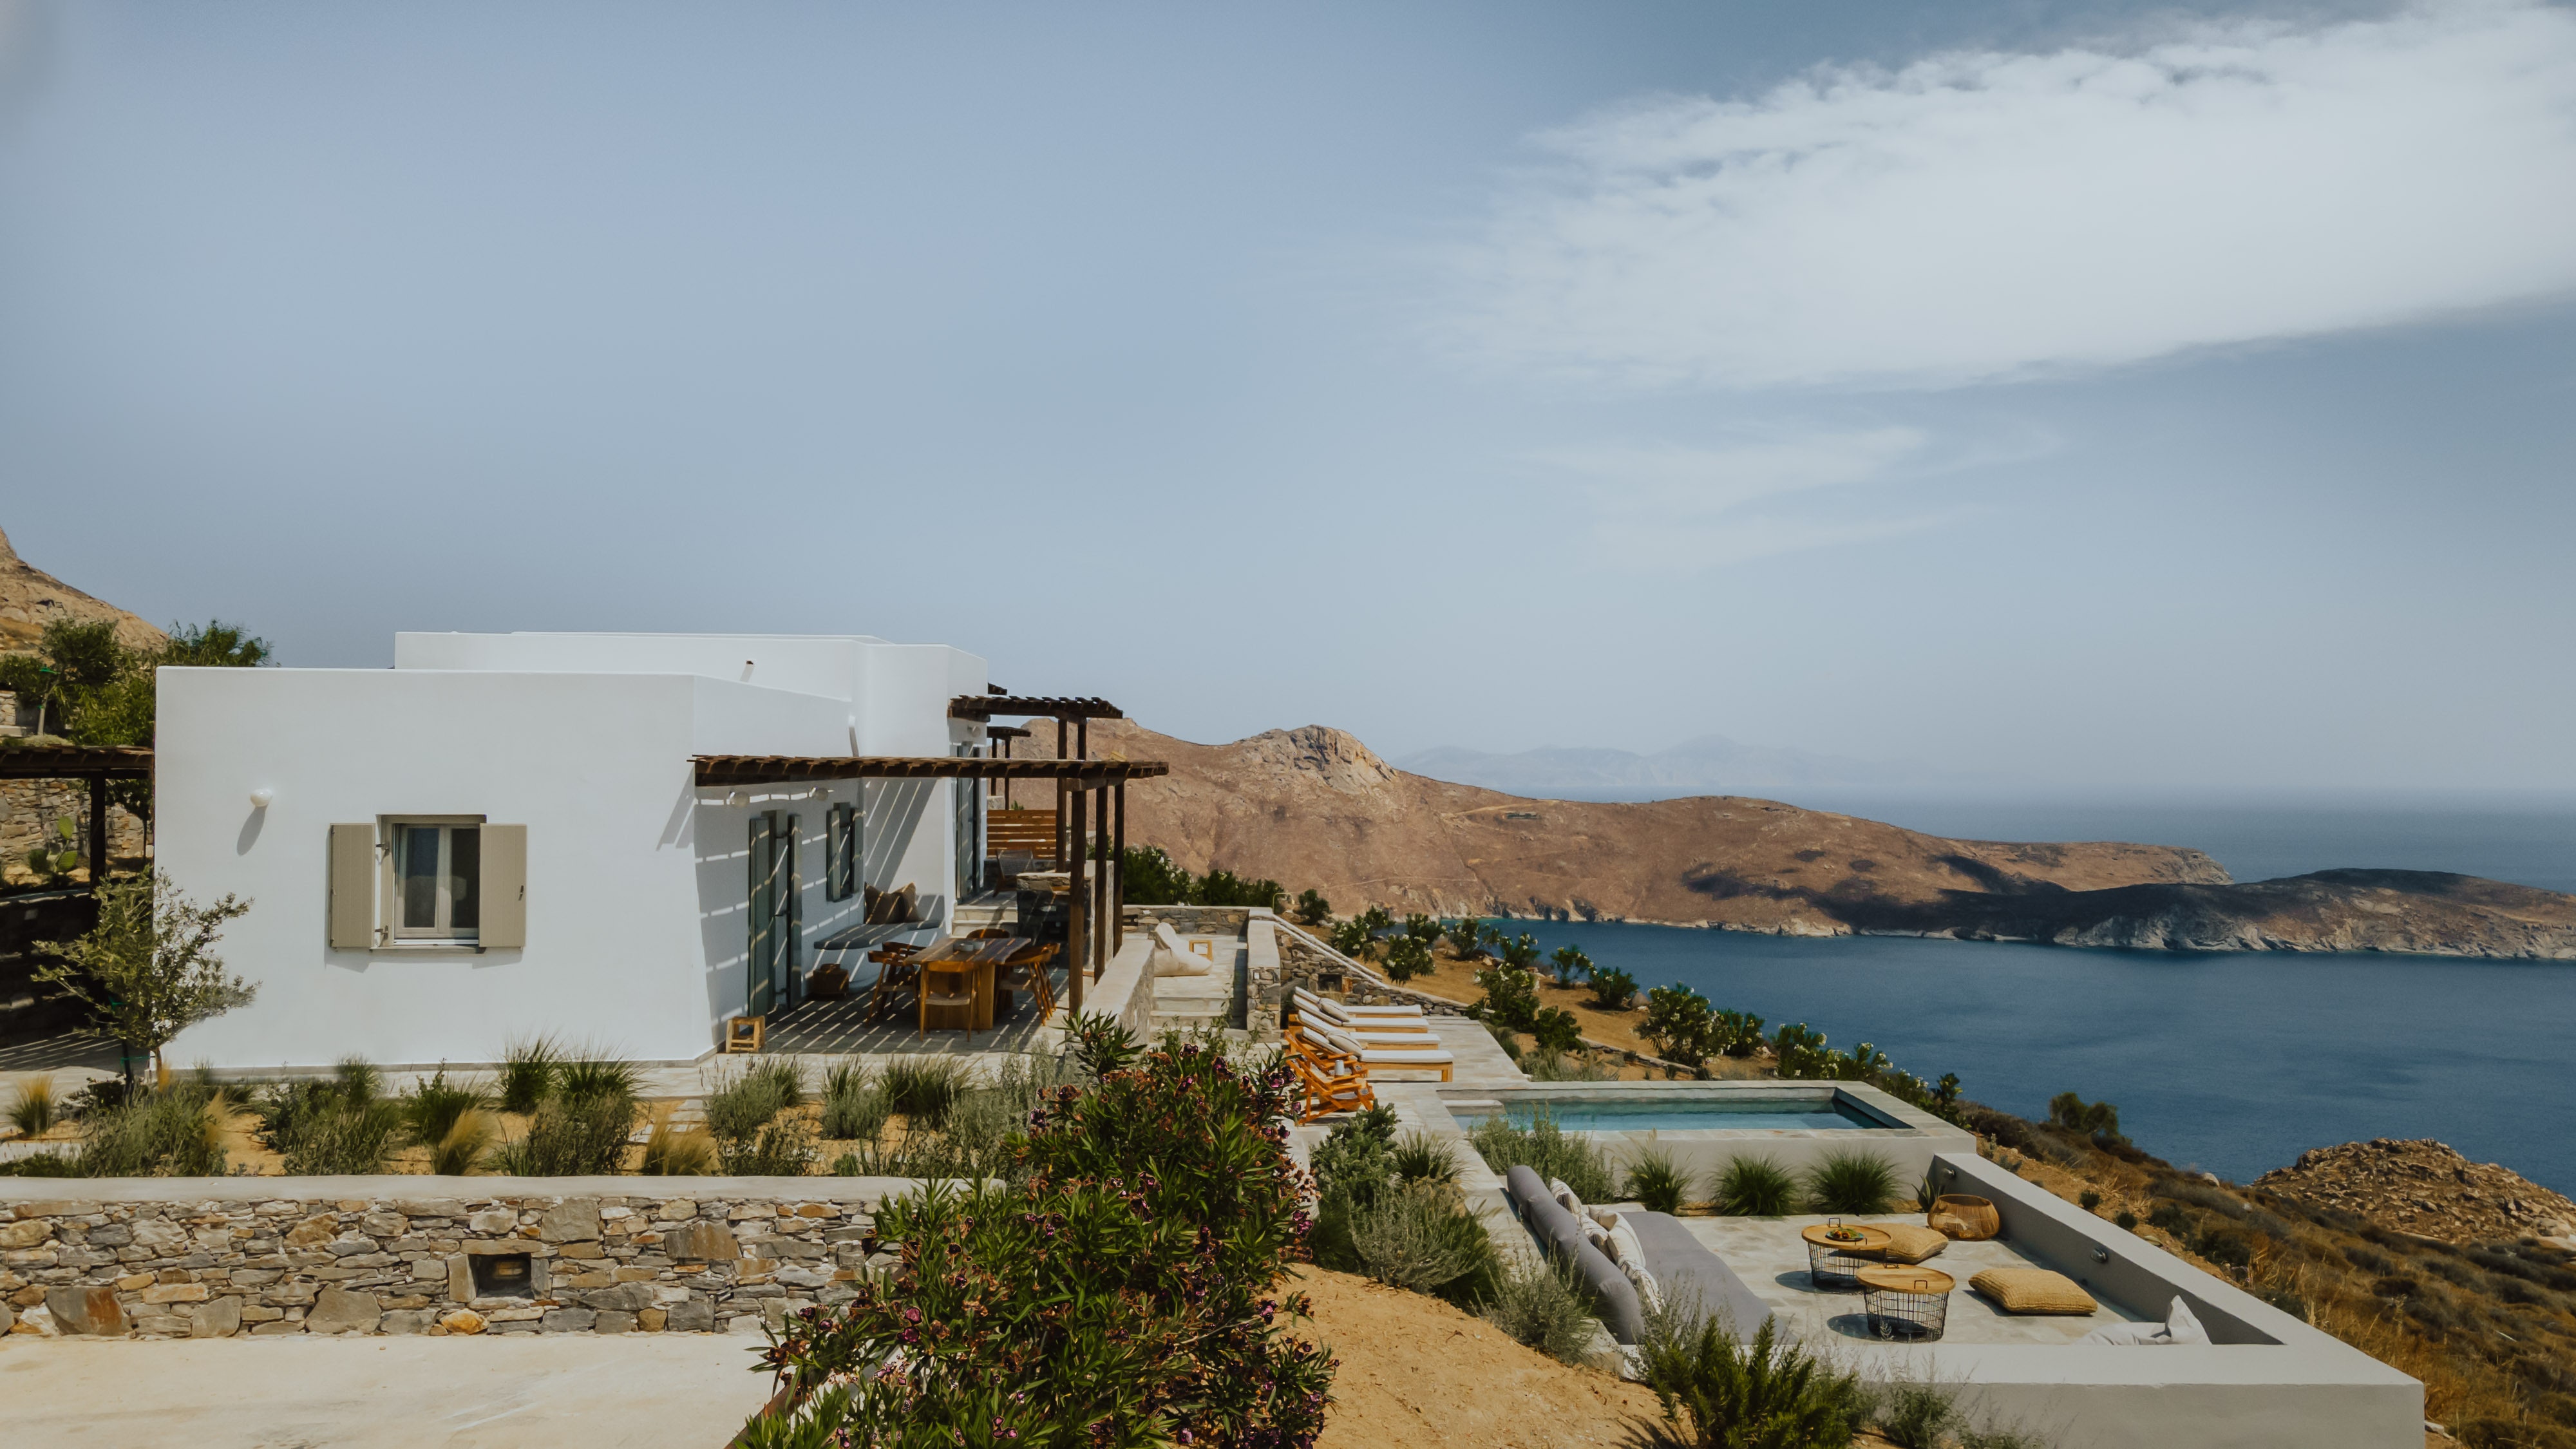 <p><strong>Serifos, Cyclades Islands</strong></p> <p>In this calming Serifos hideaway, perched atop a rugged outcrop, a four-bedroom villa has been reimagined to combine traditional Cycladic architecture and modern design elements. The house is split across multiple levels with interiors purposefully laid bare to promote a sense of calm, while views are available from every corner. Apart from the house next door, the hillside location is wonderfully isolated. Spend days in or by the pool and you’ll never tire of those sweeping sea views.</p> <p><strong>Sleeps:</strong> 8<br> <strong>Price:</strong> From $641 to $1,283 a night</p> <div class="callout"><p><a href="https://cna.st/affiliate-link/Ehjr9t1bfyFgZV2gMR4reDtE5ywy8dy5EwapBXc2EcBtUcYkEVQULn19HKY2kEhmCKeBvyvtc77d8ViJLrZG38mHiqCpSLmmFQt7VZDjA7rfz1pW9BLALgKLQFnp7i6PimYqsBfCUHnyfPfv4GtU4J7fDLzgG" rel="sponsored" title="Book now at Welcome Beyond">Book now at Welcome Beyond</a></p> </div><p>Sign up to receive the latest news, expert tips, and inspiration on all things travel.</p><a href="https://www.cntraveler.com/newsletter/the-daily?sourceCode=msnsend">Inspire Me</a>